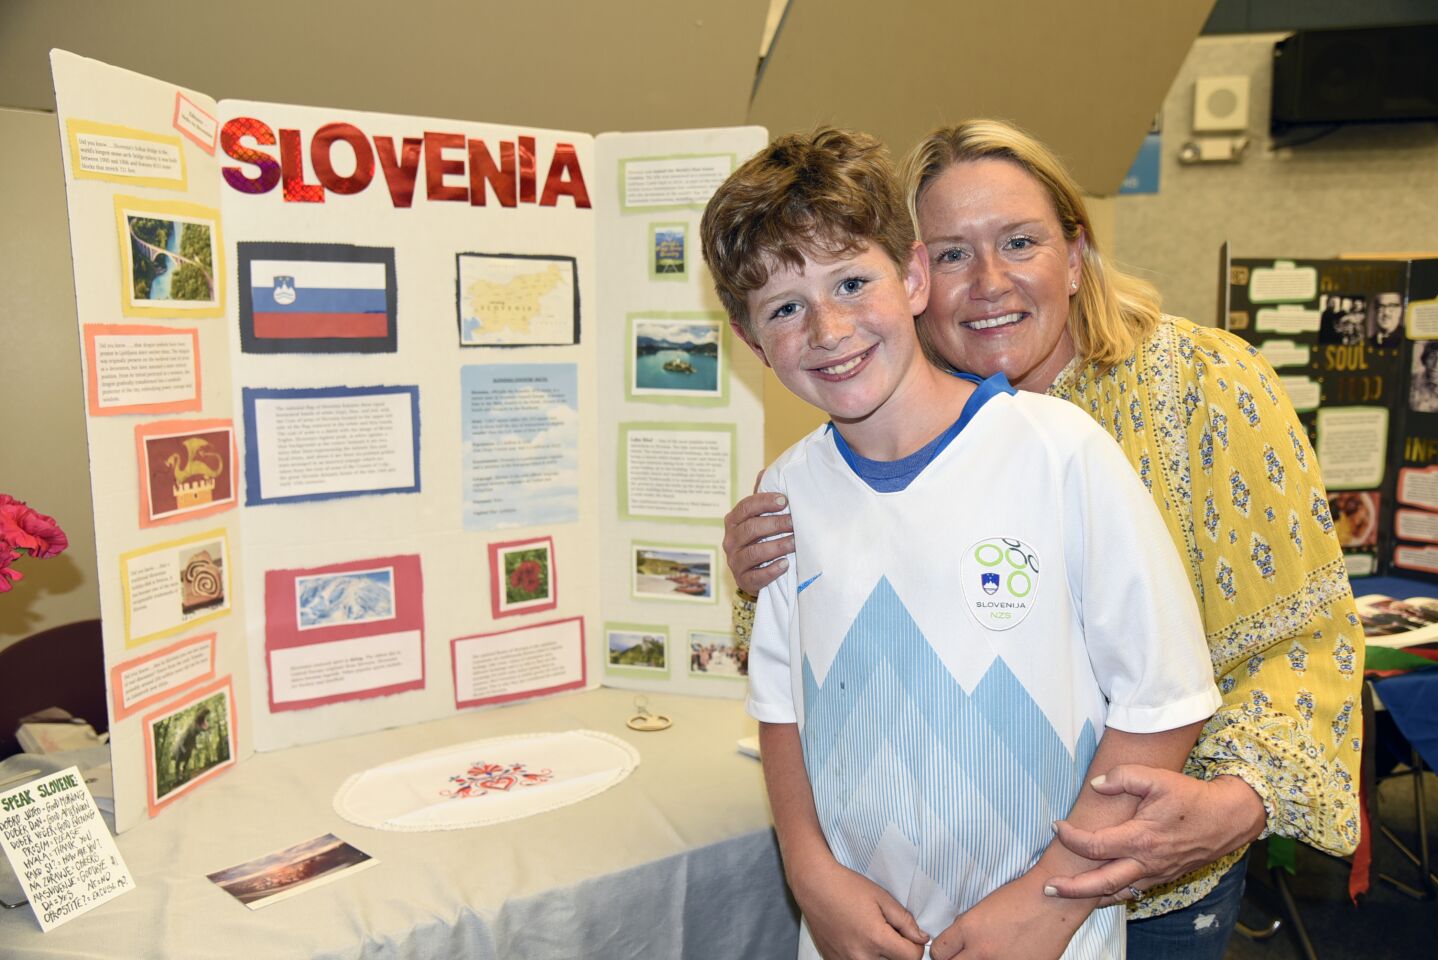 Libby Hellmann with Andrew representing Slovenia